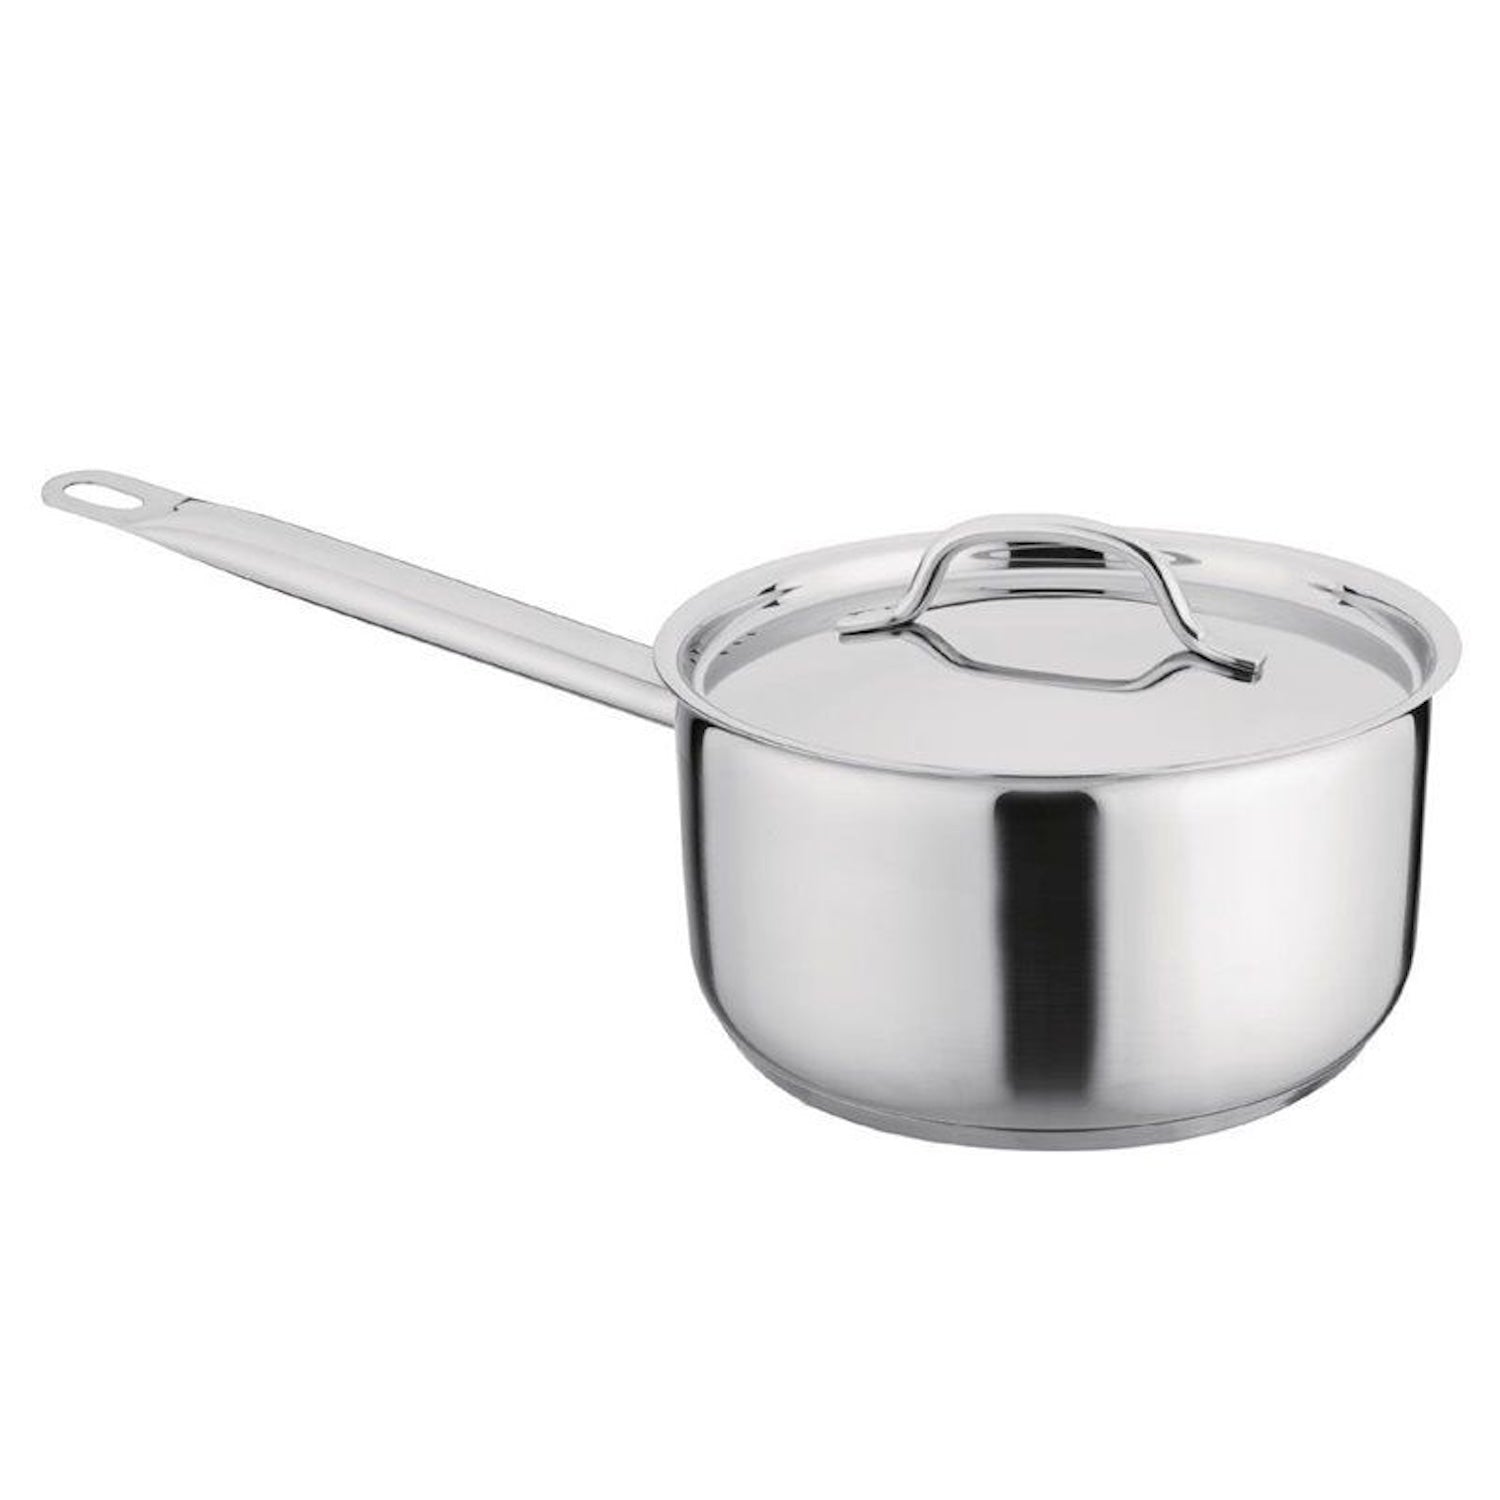 Saucepan with Lid | 900ml | Stainless Steel